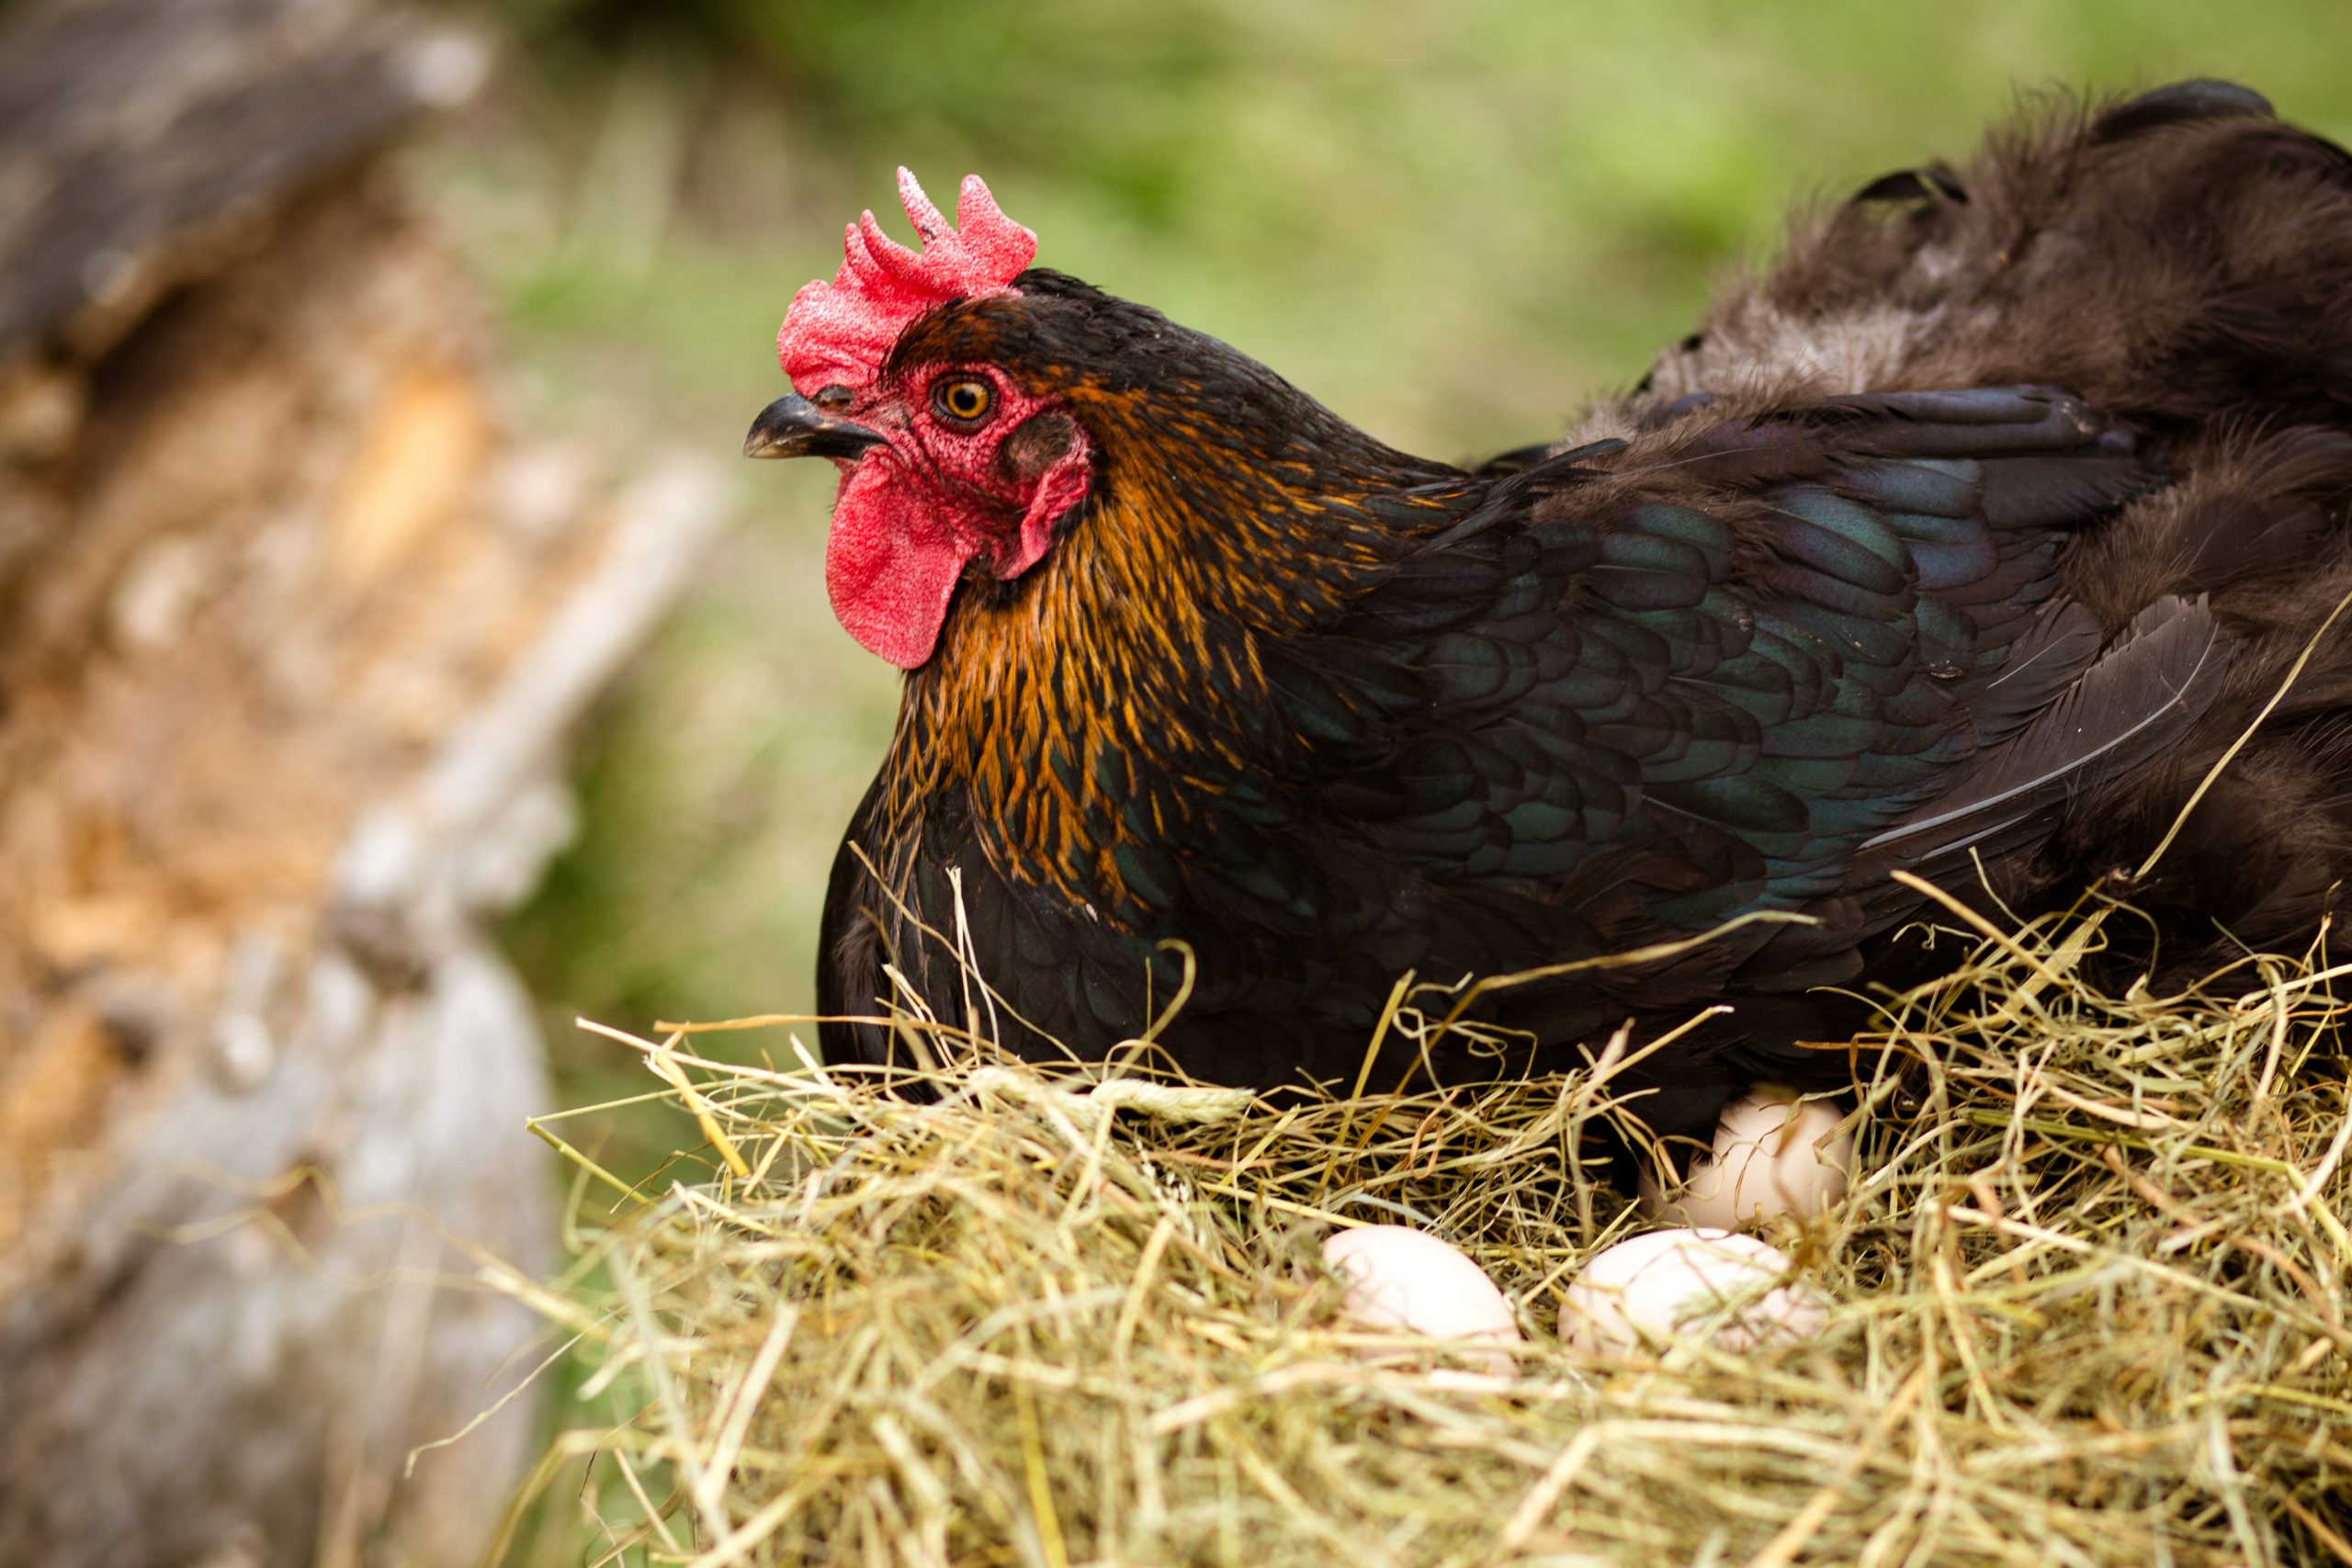 Chicken,Hatching,Eggs.,The,Lifestyle,Of,The,Farm,In,The